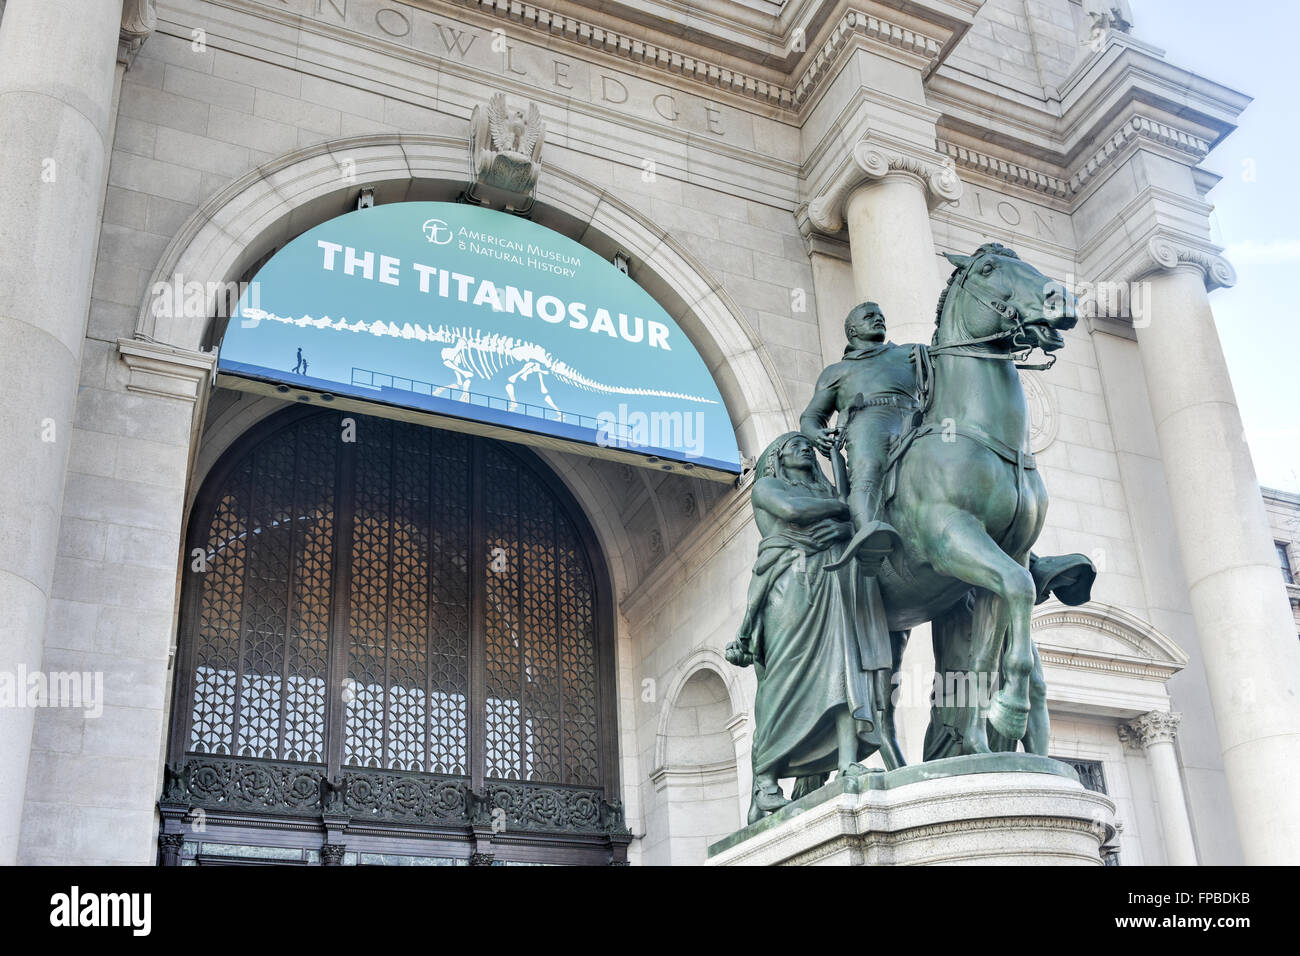 New York City - January 31, 2016: American Museum of Natural History in Manhattan. The museum collections contain over 32 millio Stock Photo